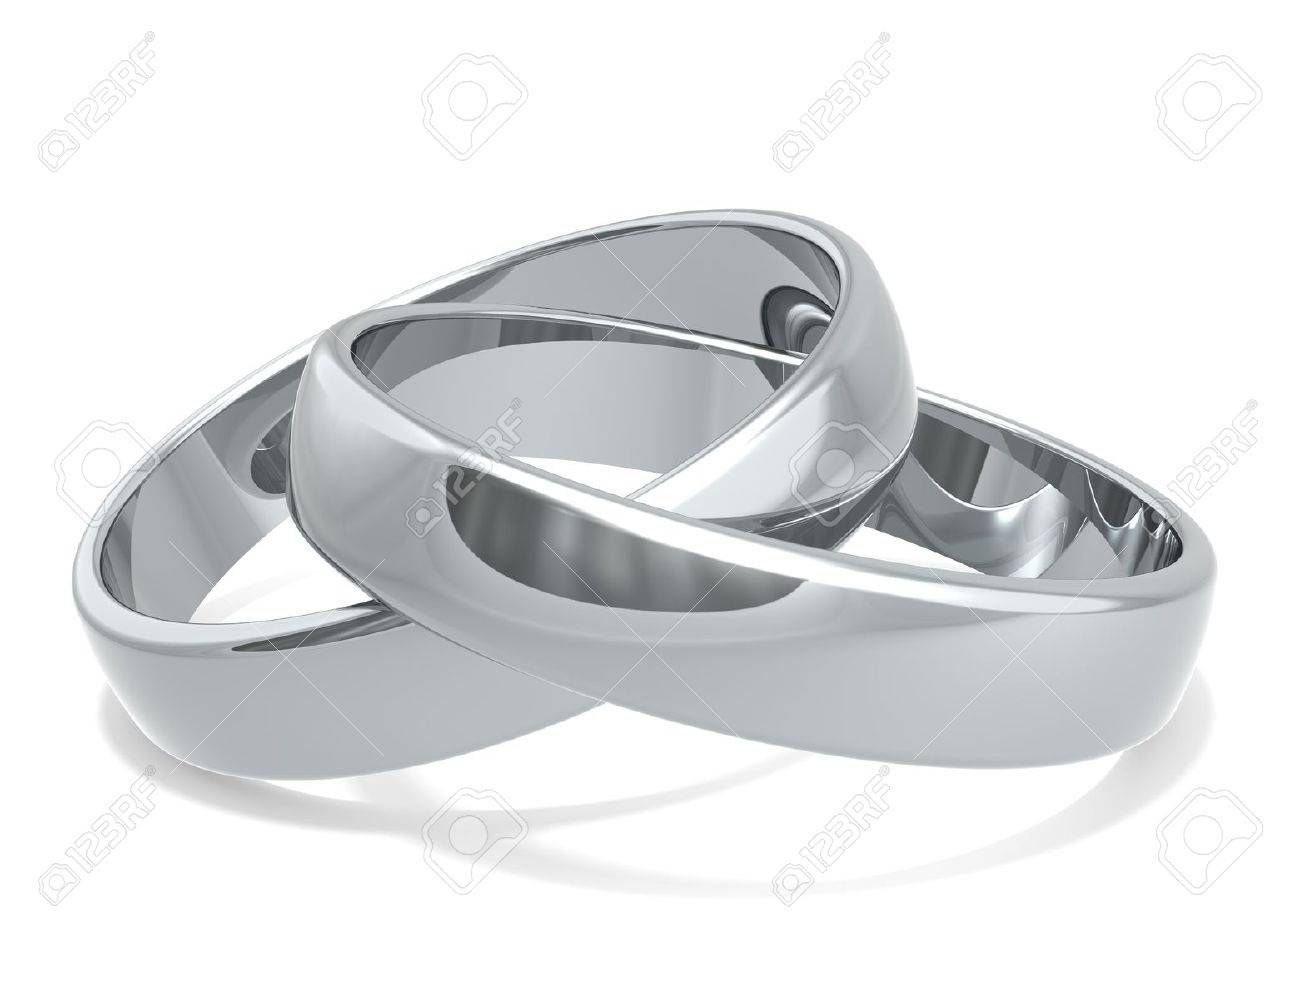 New Silver Wedding Anniversary Rings Photo Gallery – Alsayegh Within Newest 25 Wedding Anniversary Rings (View 3 of 25)